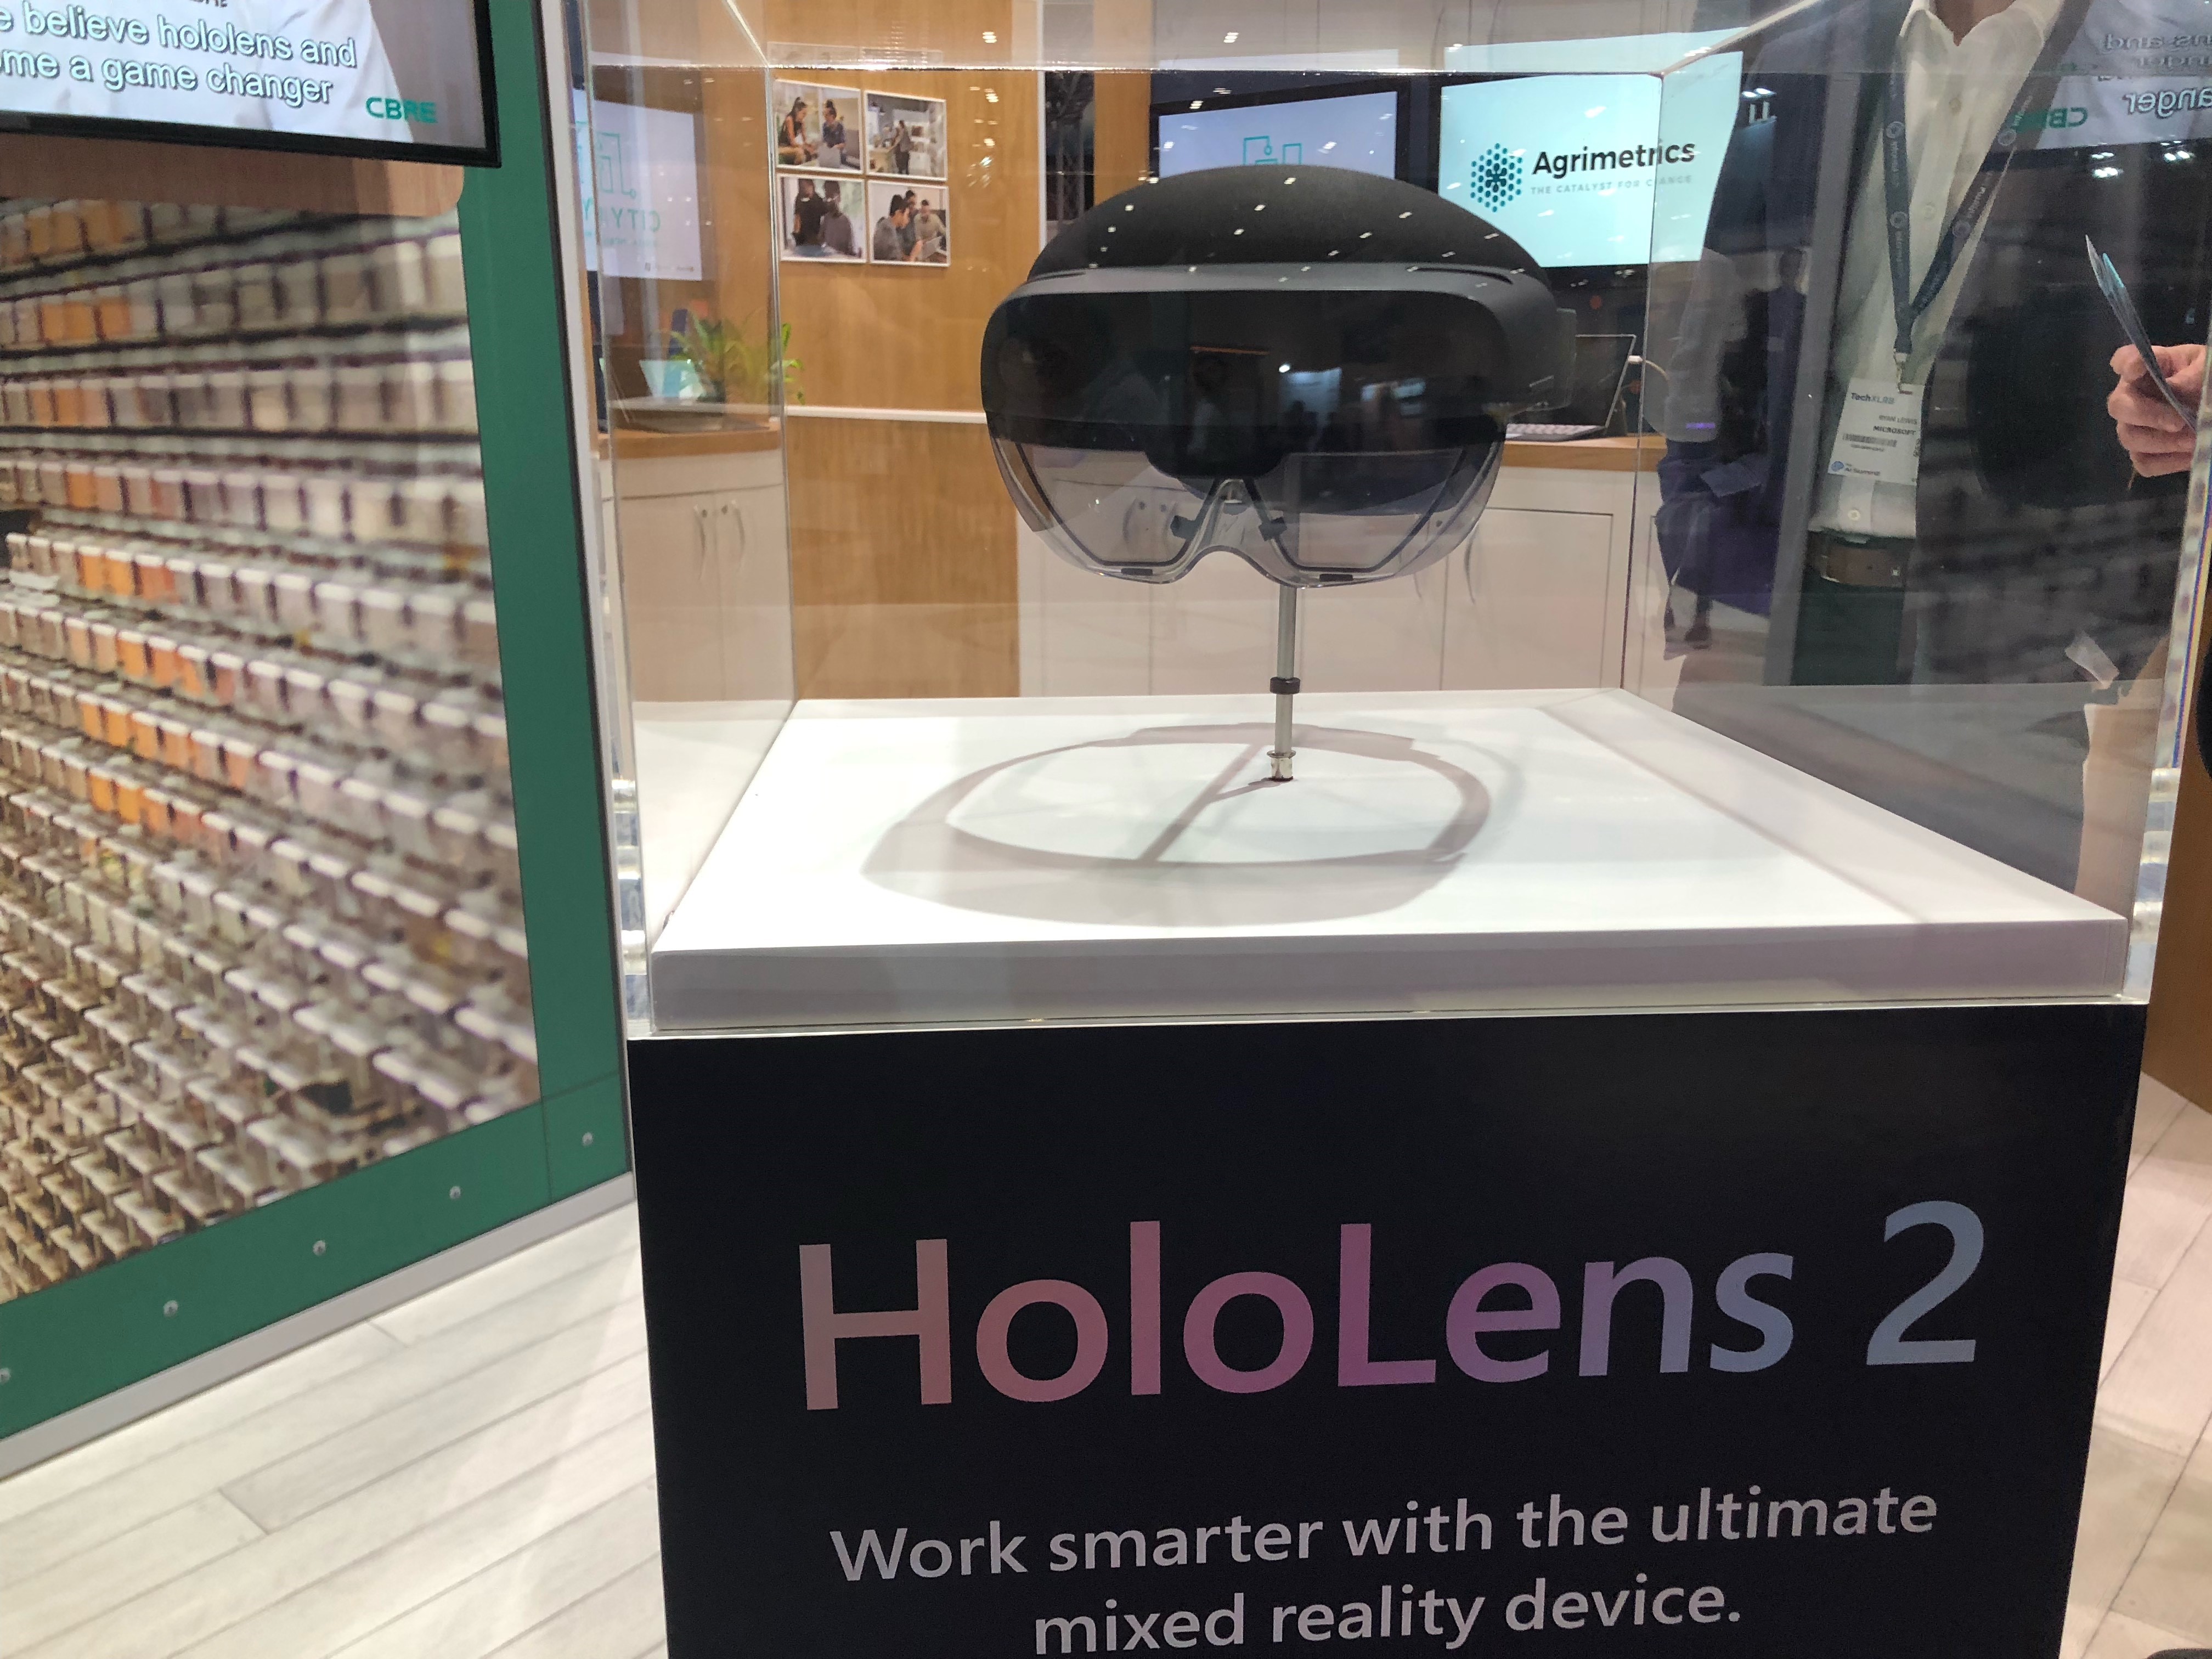 HoloLens 2 was on display at the ExCeL